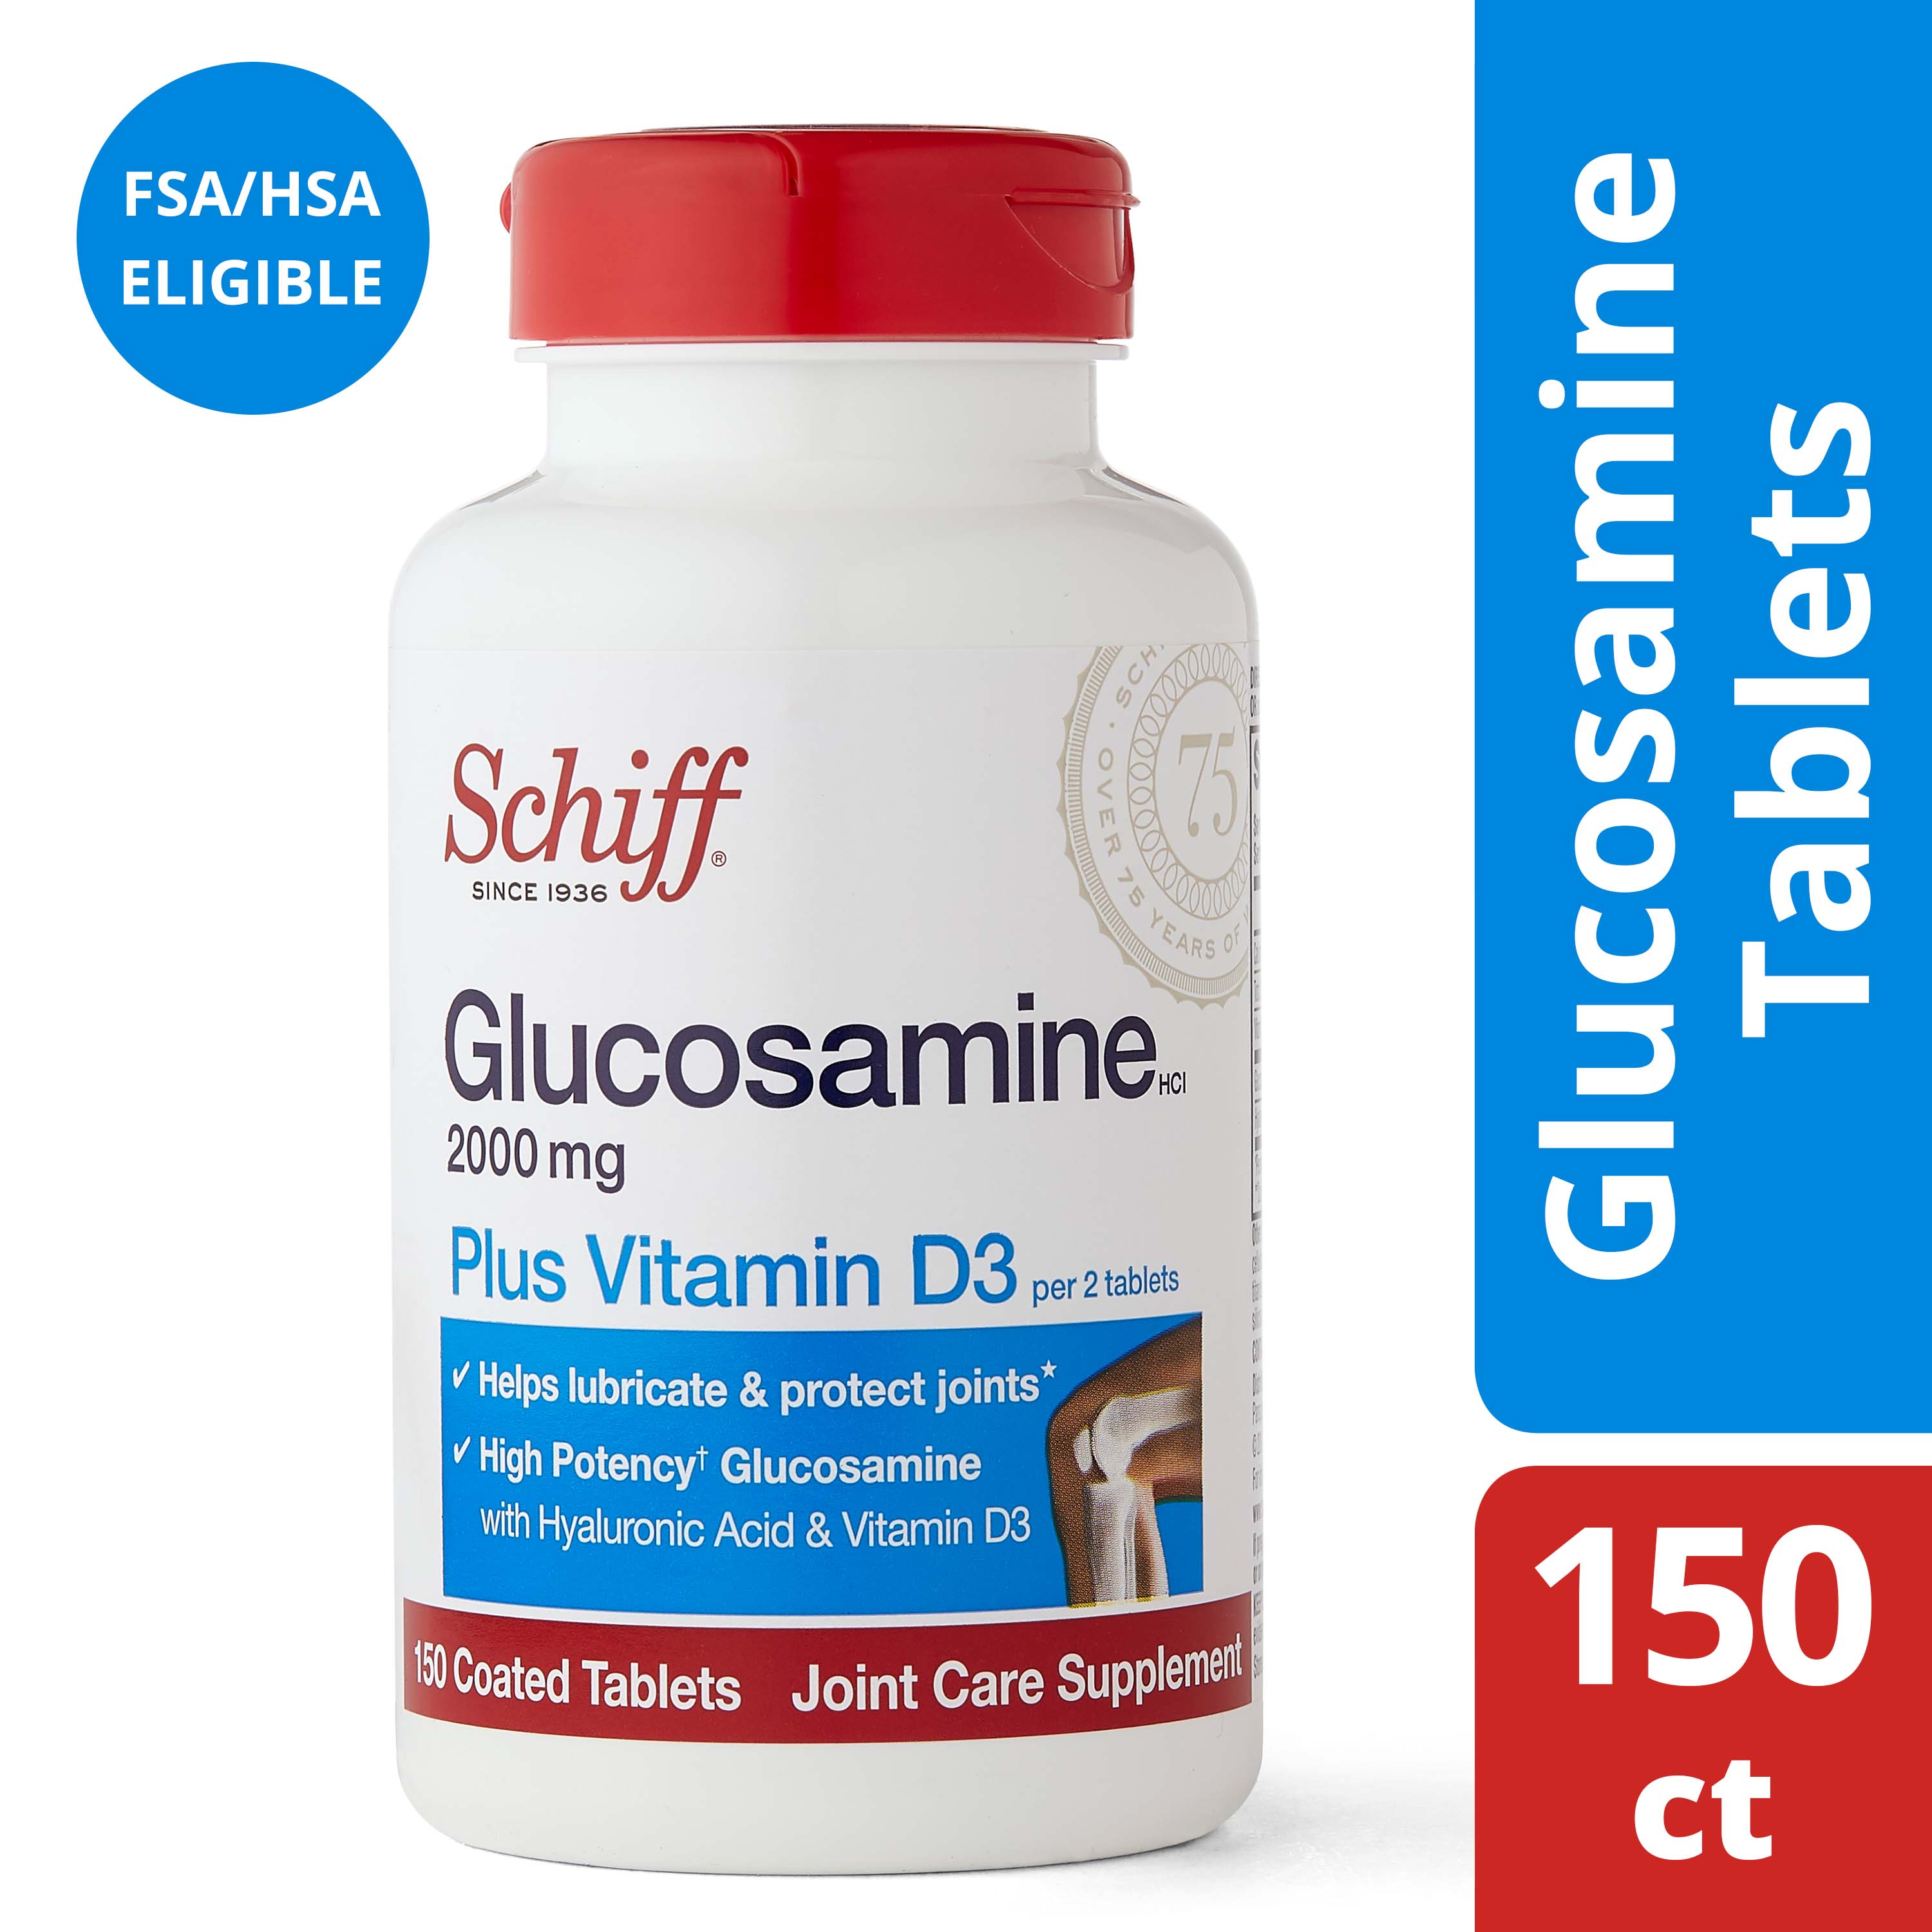 Schiff Glucosamine 2000mg with Vitamin D3 and Hyaluronic Acid, 150 tablets - Joint Supplement - image 1 of 2